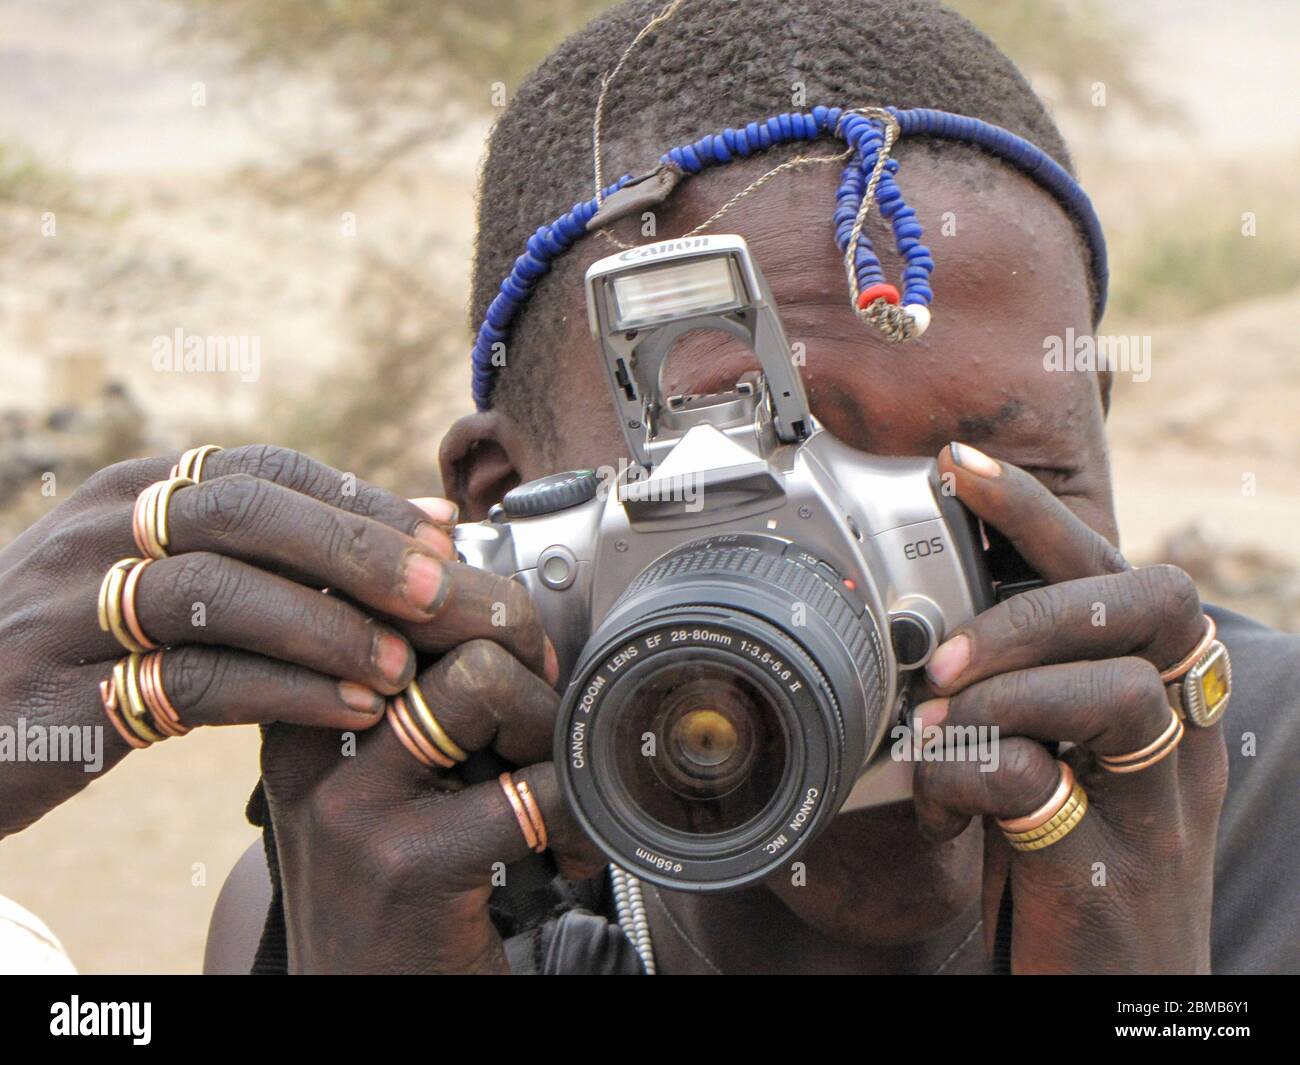 Portrait of a young Maasai tribesman with a camera. Maasai is an ethnic group of semi-nomadic people. Photographed in Tanzania Stock Photo